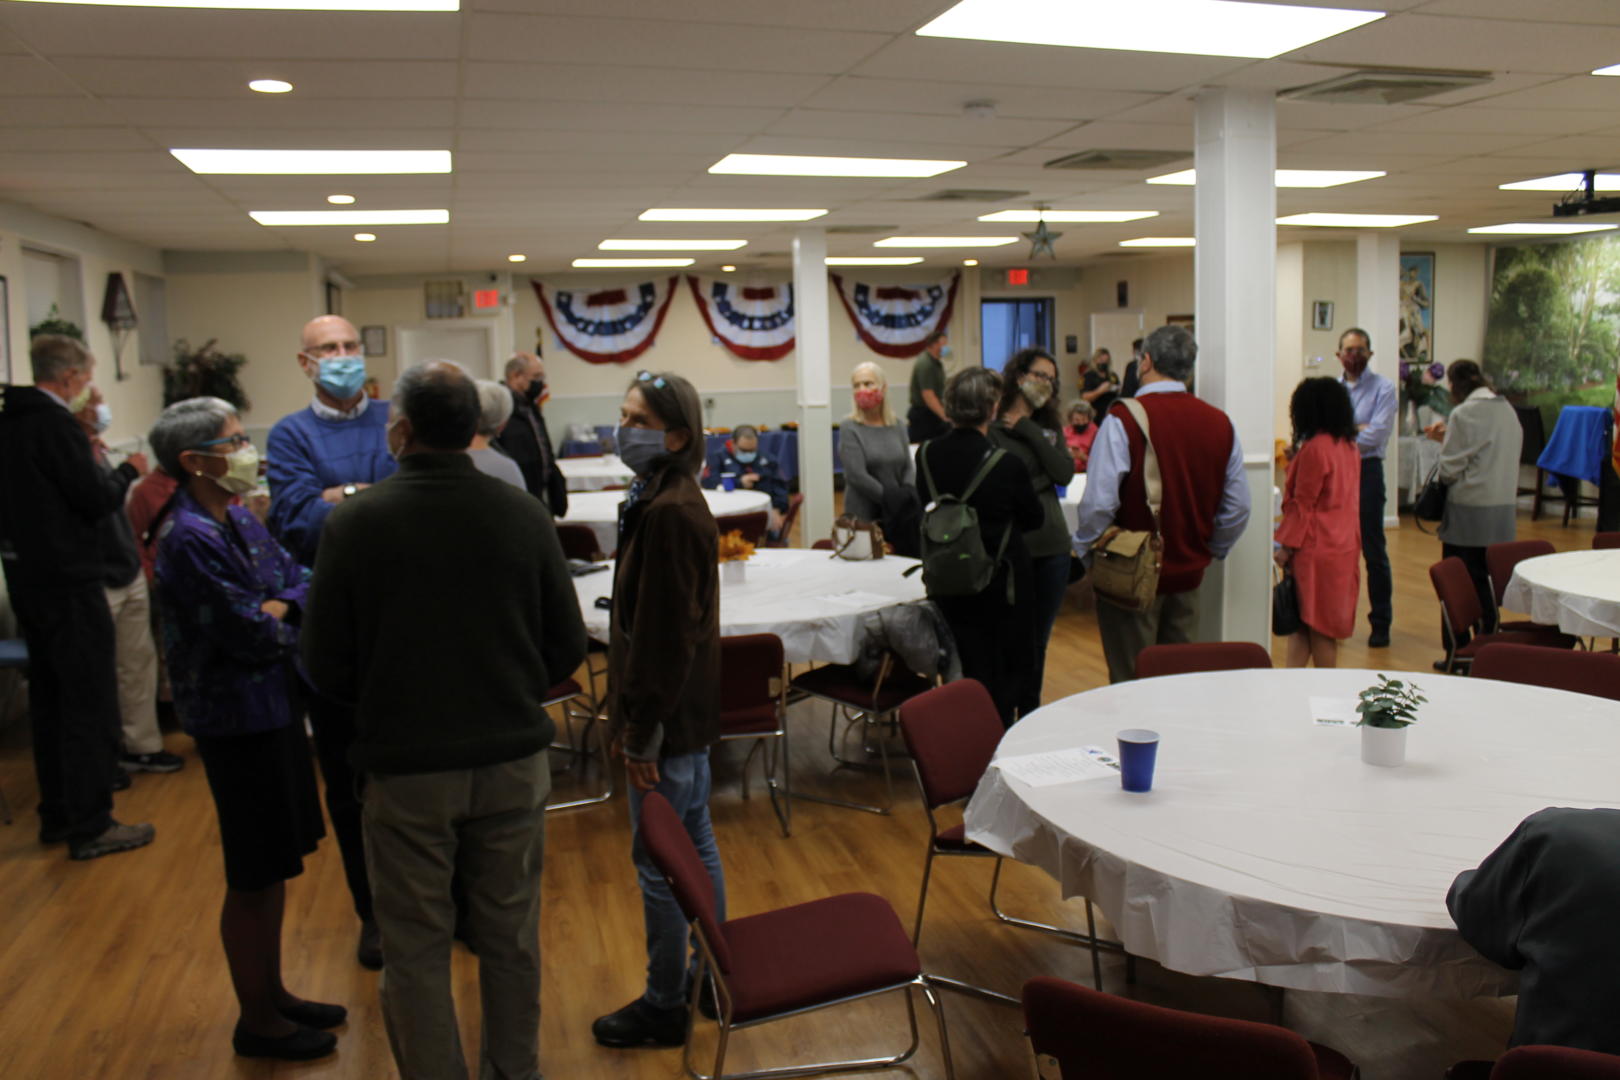 Brookline's Medical Reserve Corps and Community Emergency Response Team held an appreciation night for volunteers last week. (Photo Courtesy Town of Brookline)